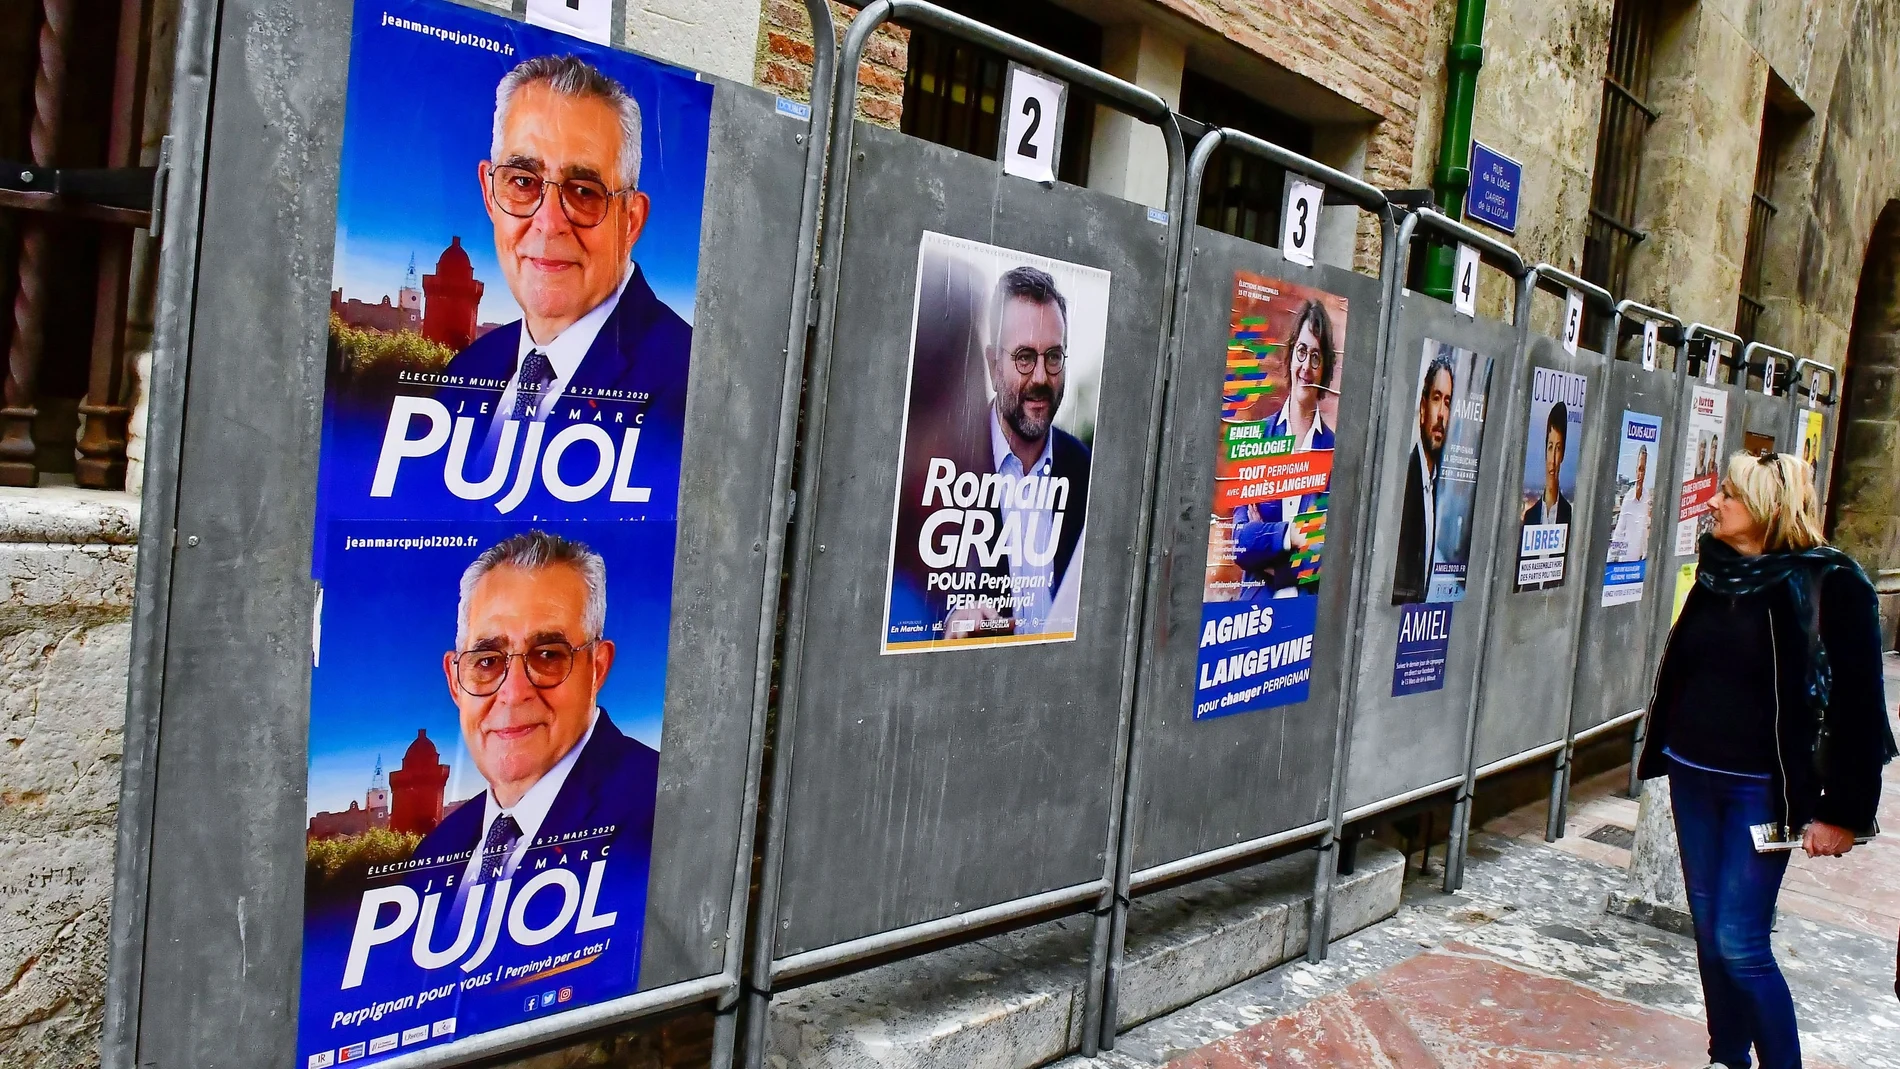 Campaign posters of Jean-Marc Pujol, Mayor of Perpignan, are seen in front of the city hall in Perpignan